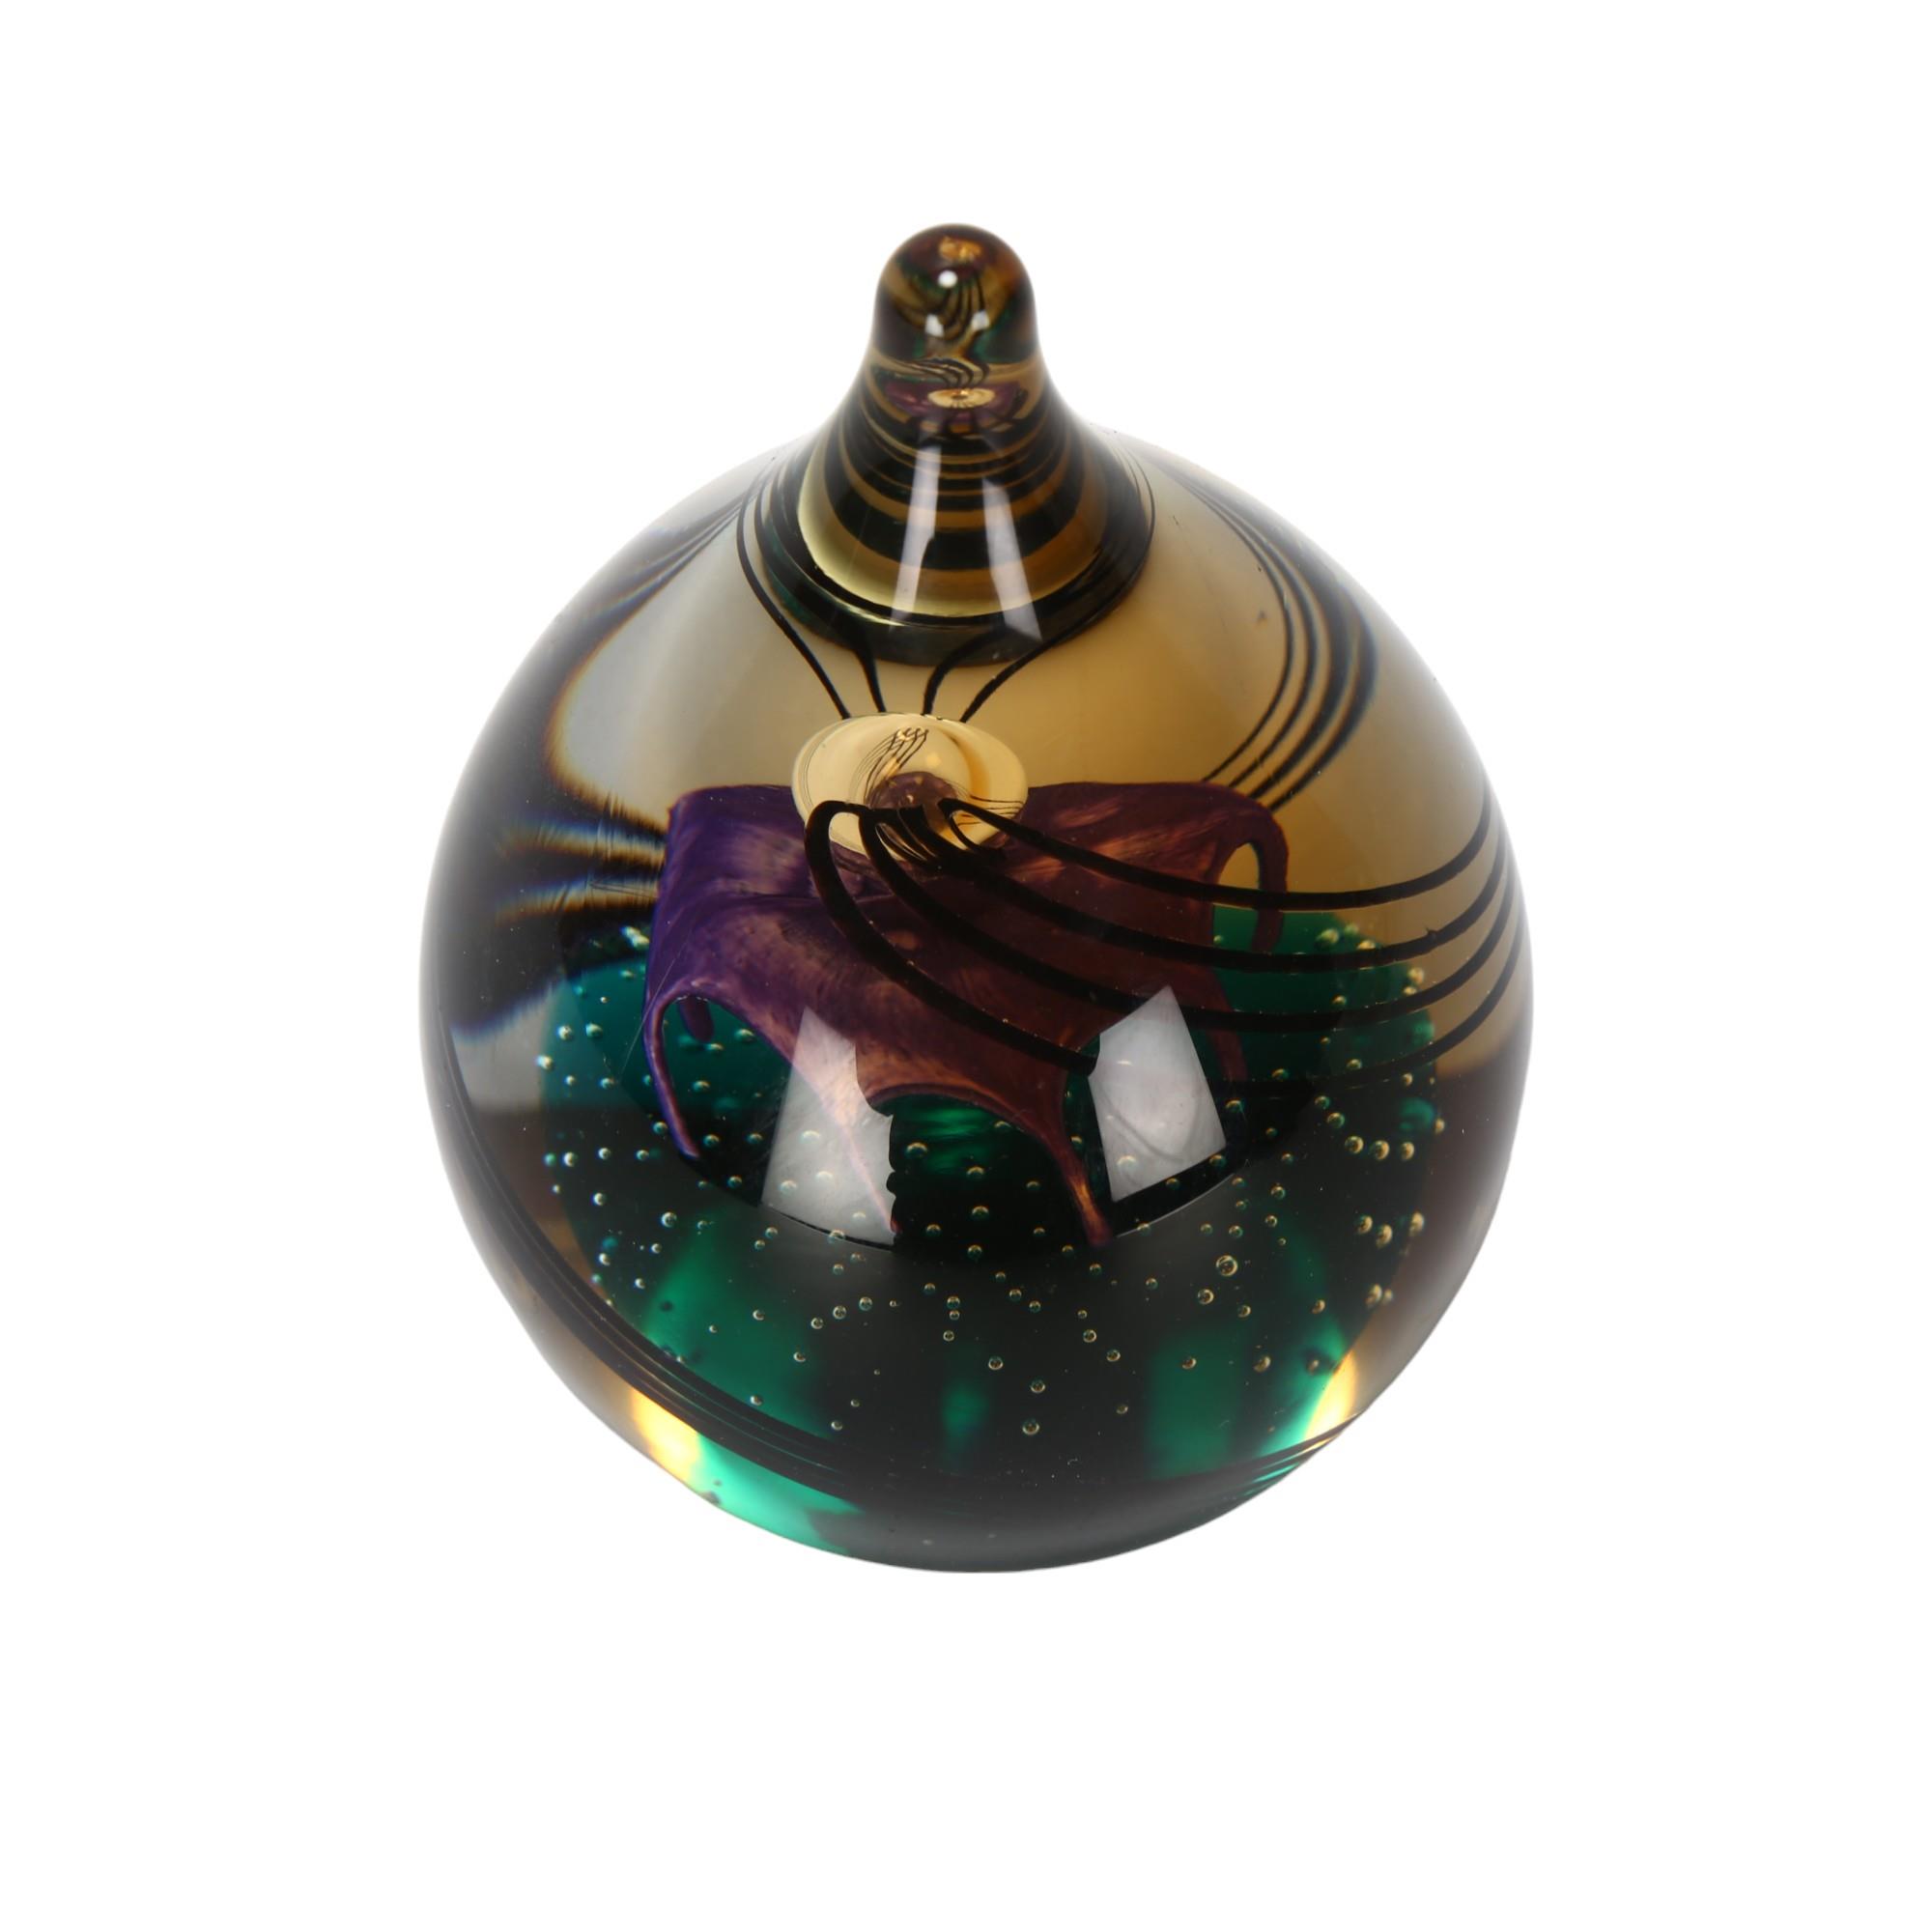 MARGOT THOMPSON for Caithness Glass, a Vivaldi design paperweight, signed and numbered 588-750 to - Image 3 of 3